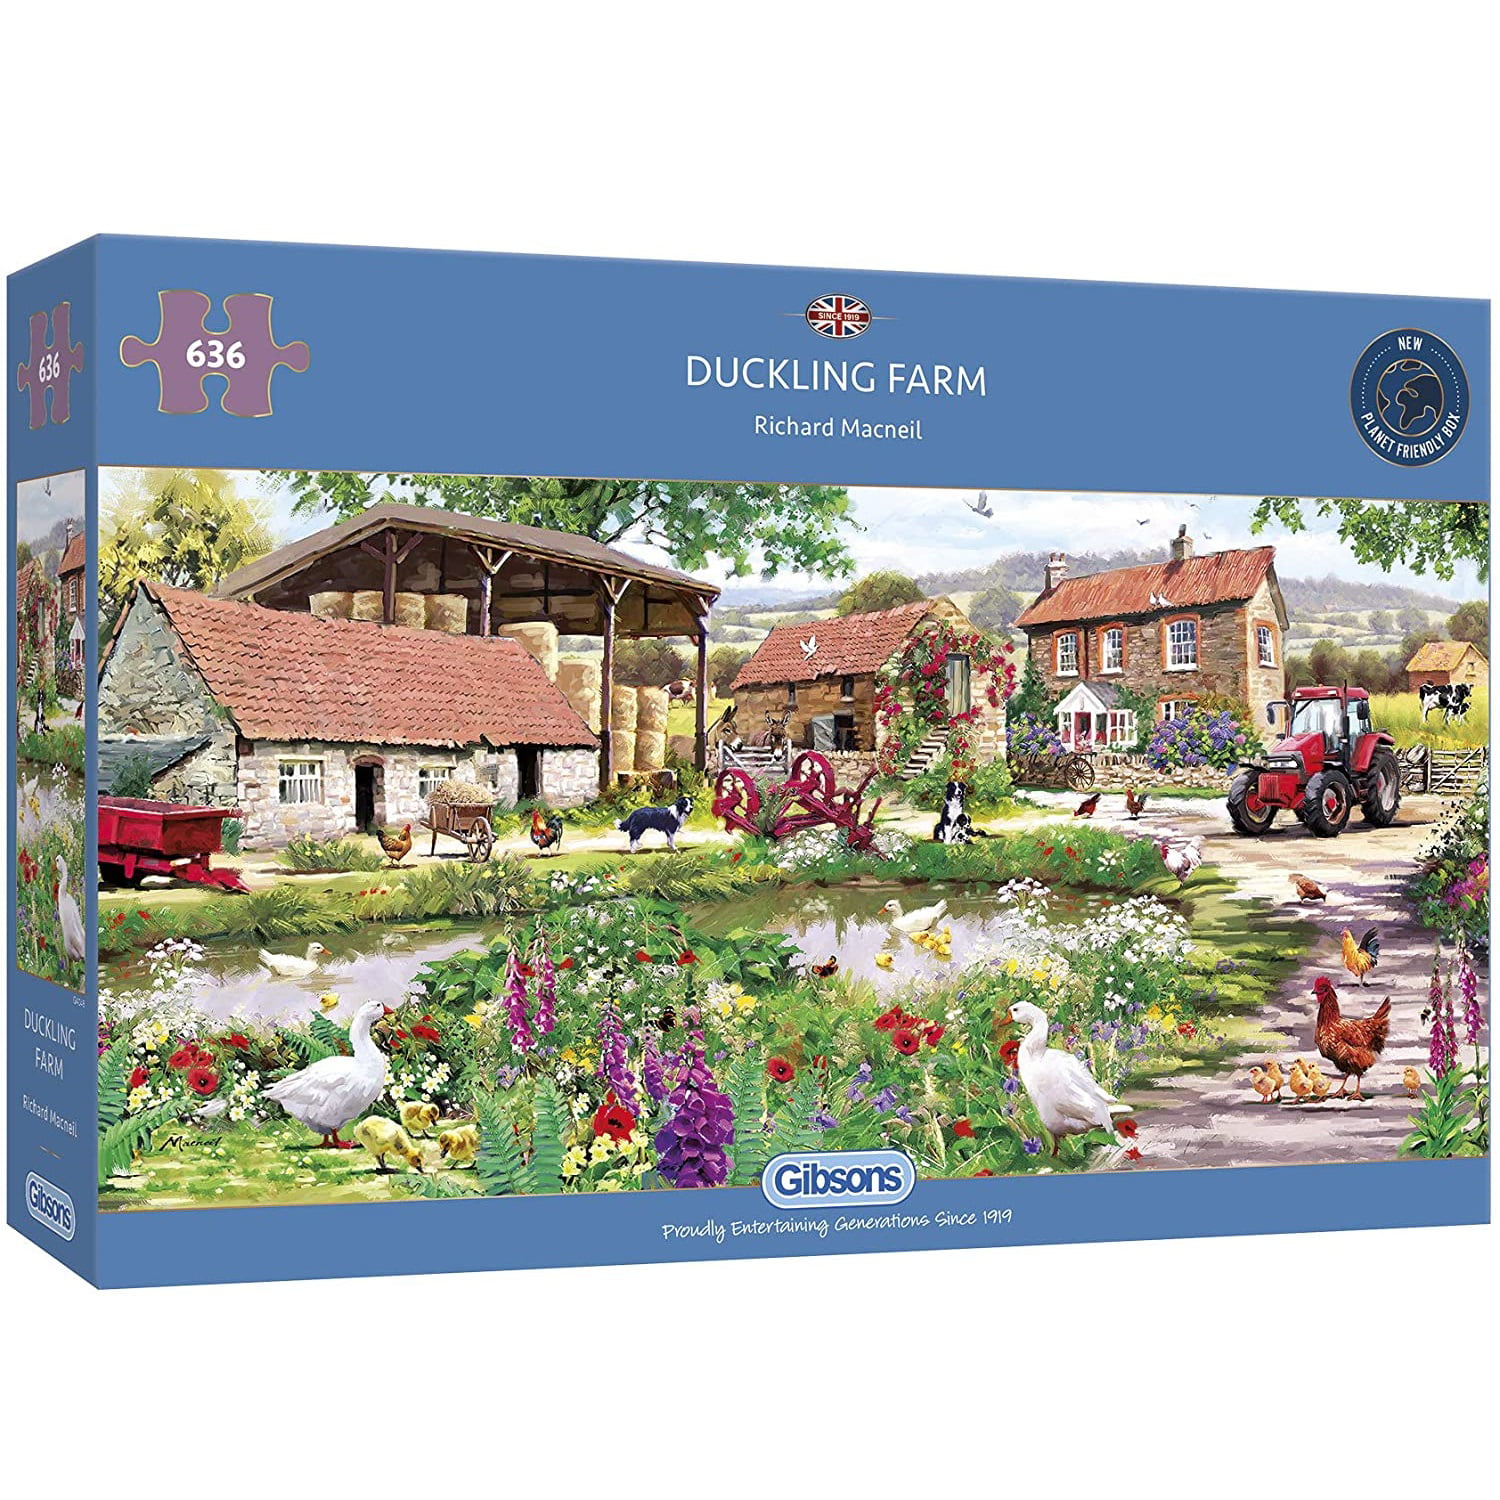 Life On The Farm Gibsons Jigsaw Puzzle 1000 Piece 